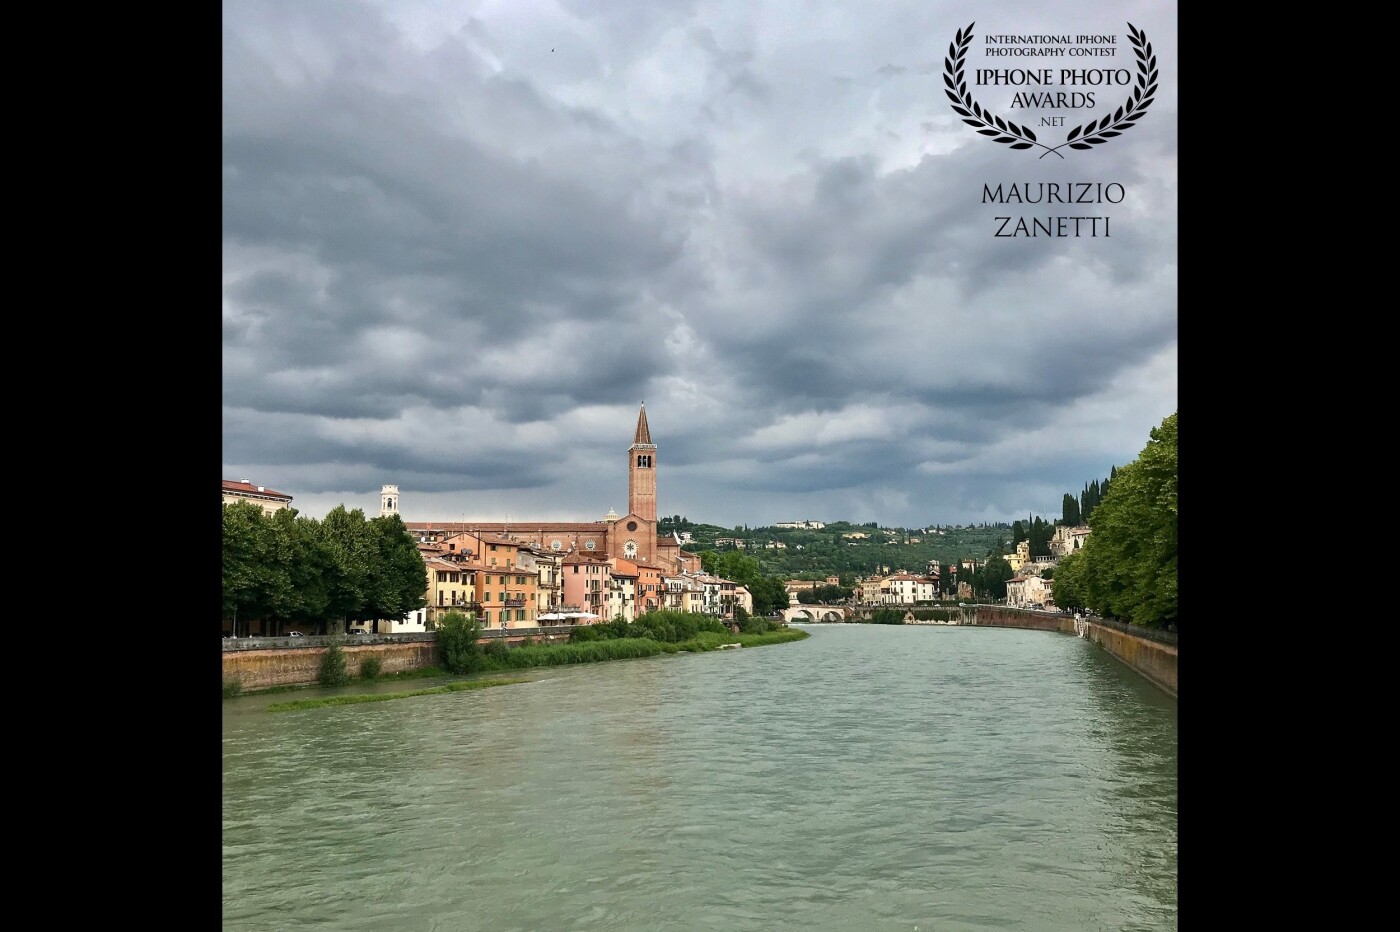 A classic view of Verona from Ponte Nuovo towards the Church of Sant'Anastasia and Castel San Pietro. Waiting for the storm coming.